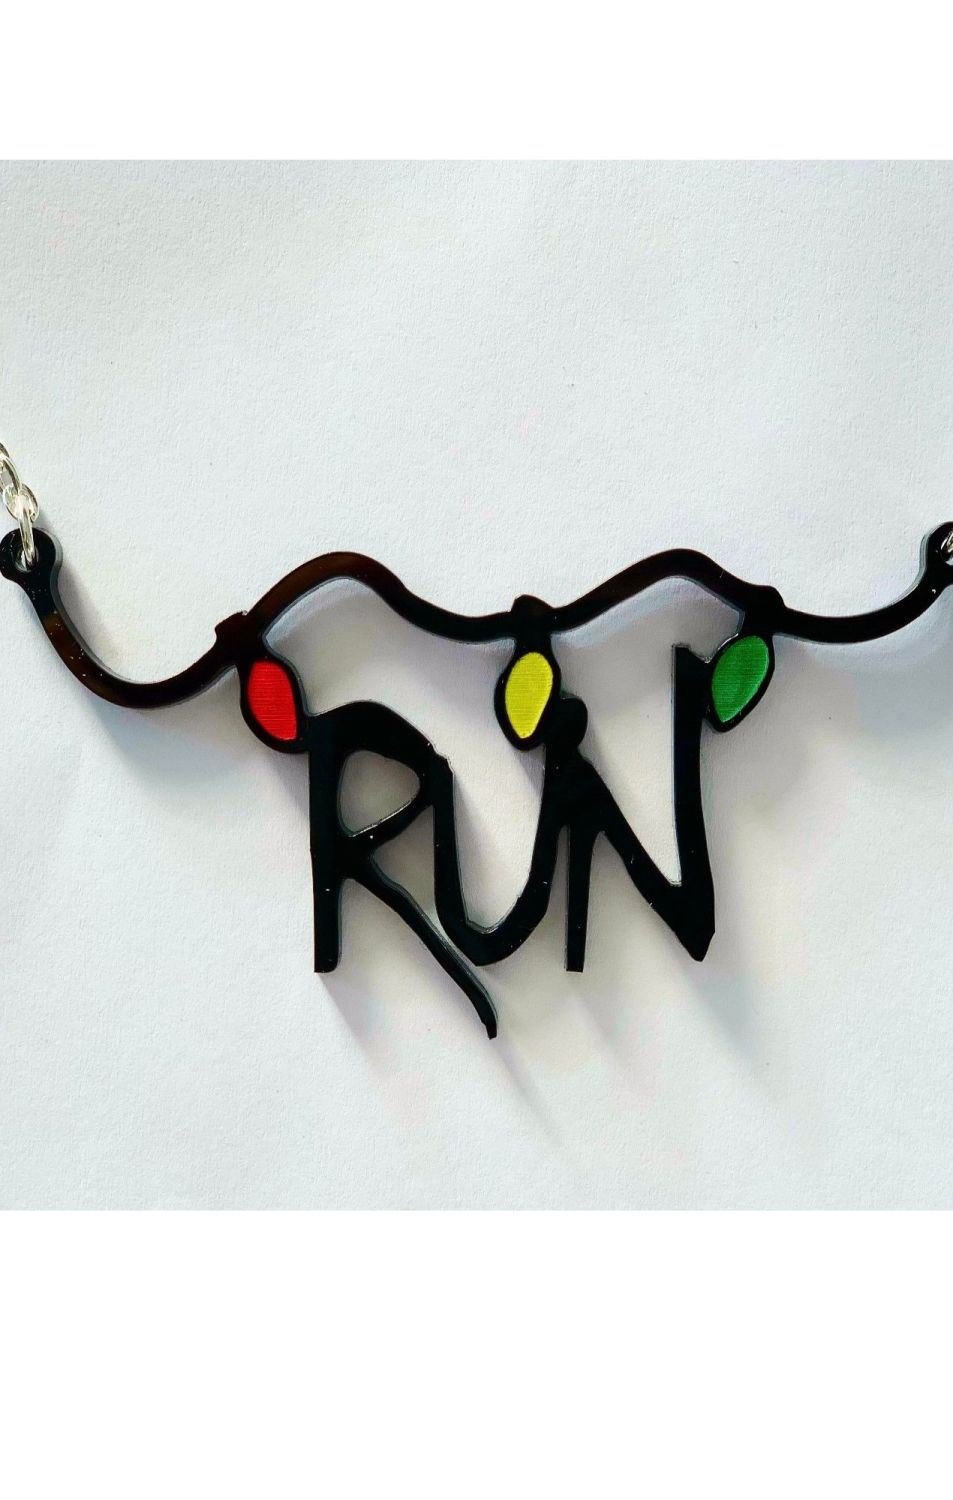 Run ST necklace RRP £9.99